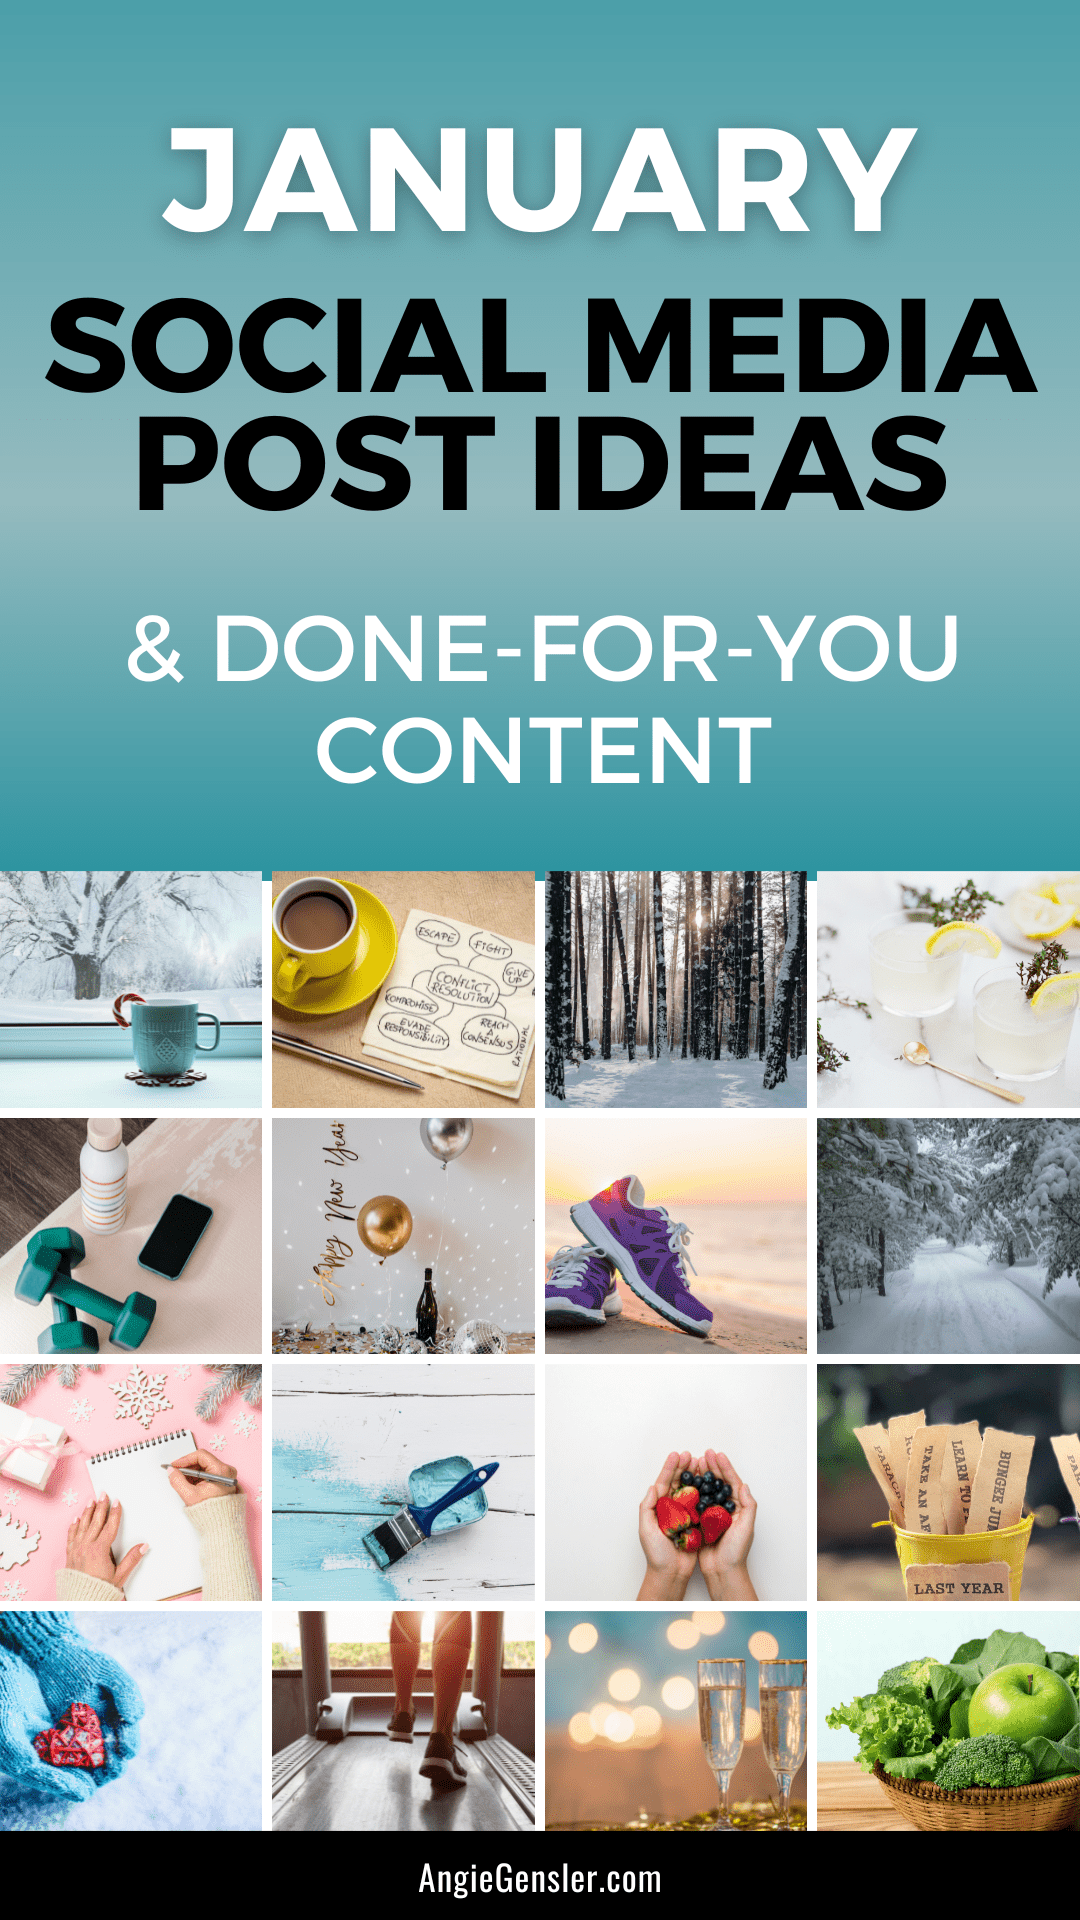 January Social Media Post Ideas + DoneForYou Content Angie Gensler